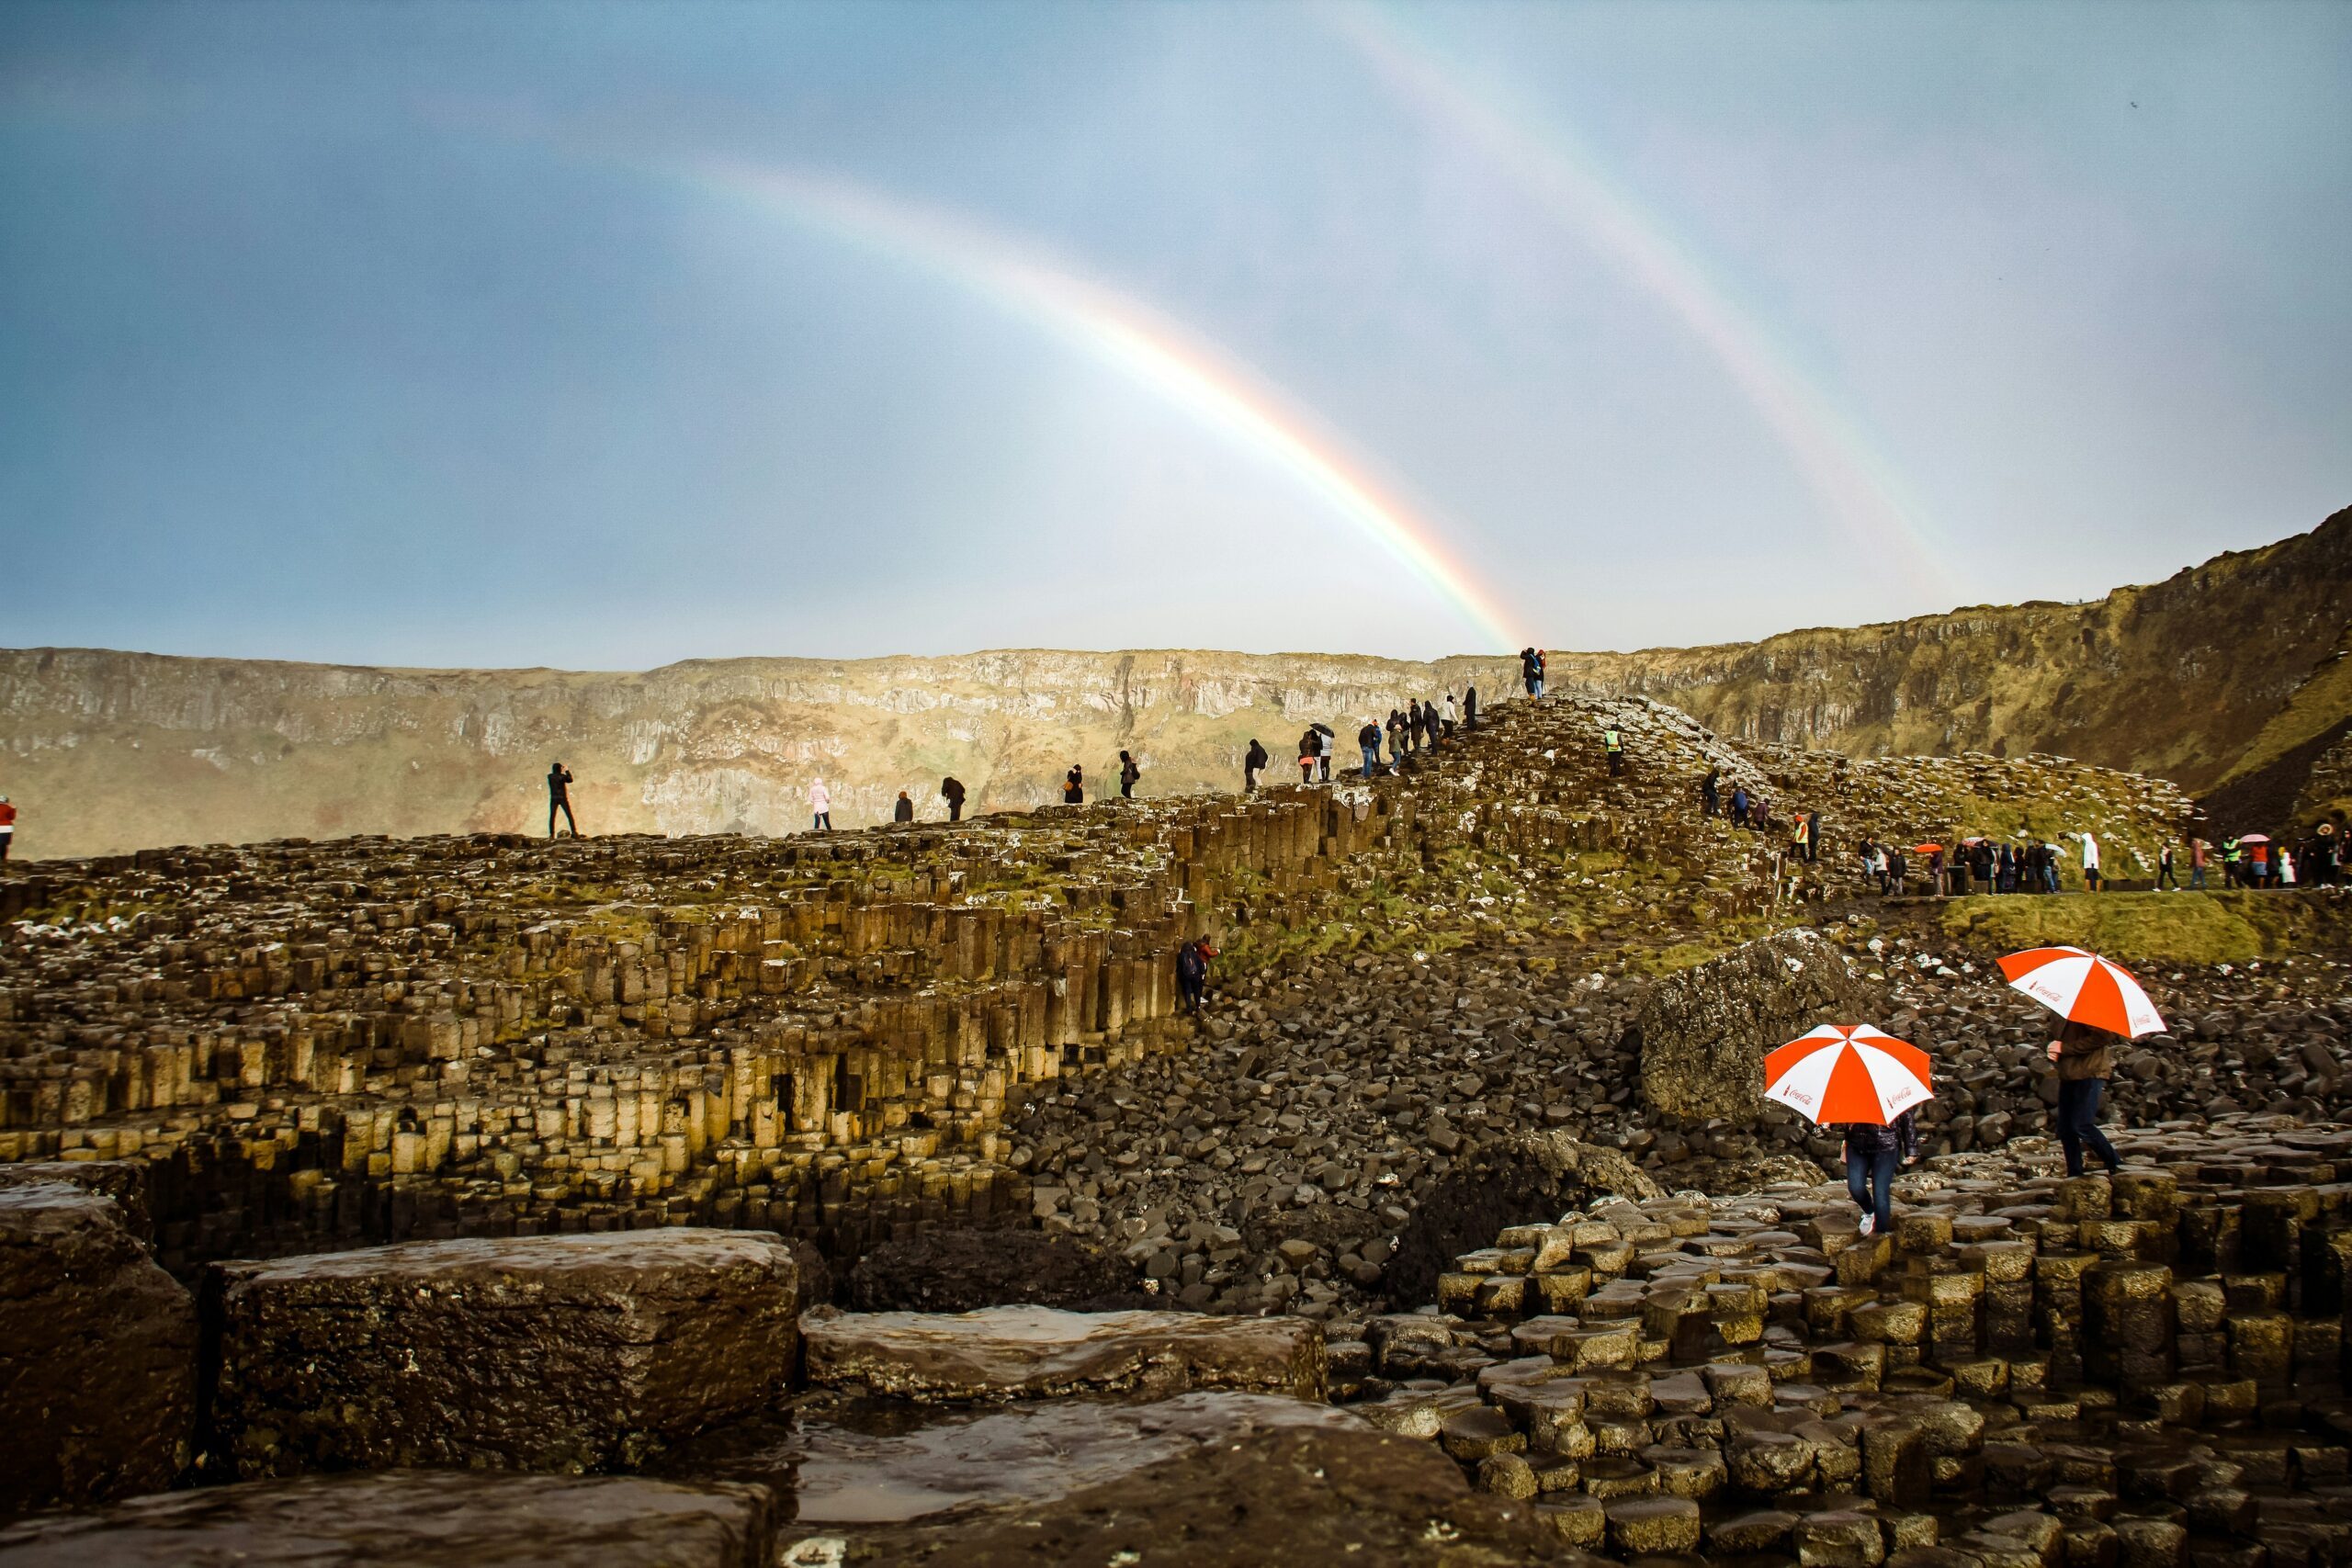 Beautiful sites such as the Giant's Causeway and the gentle 'soft weather' rain would appeal to Gulf tourists